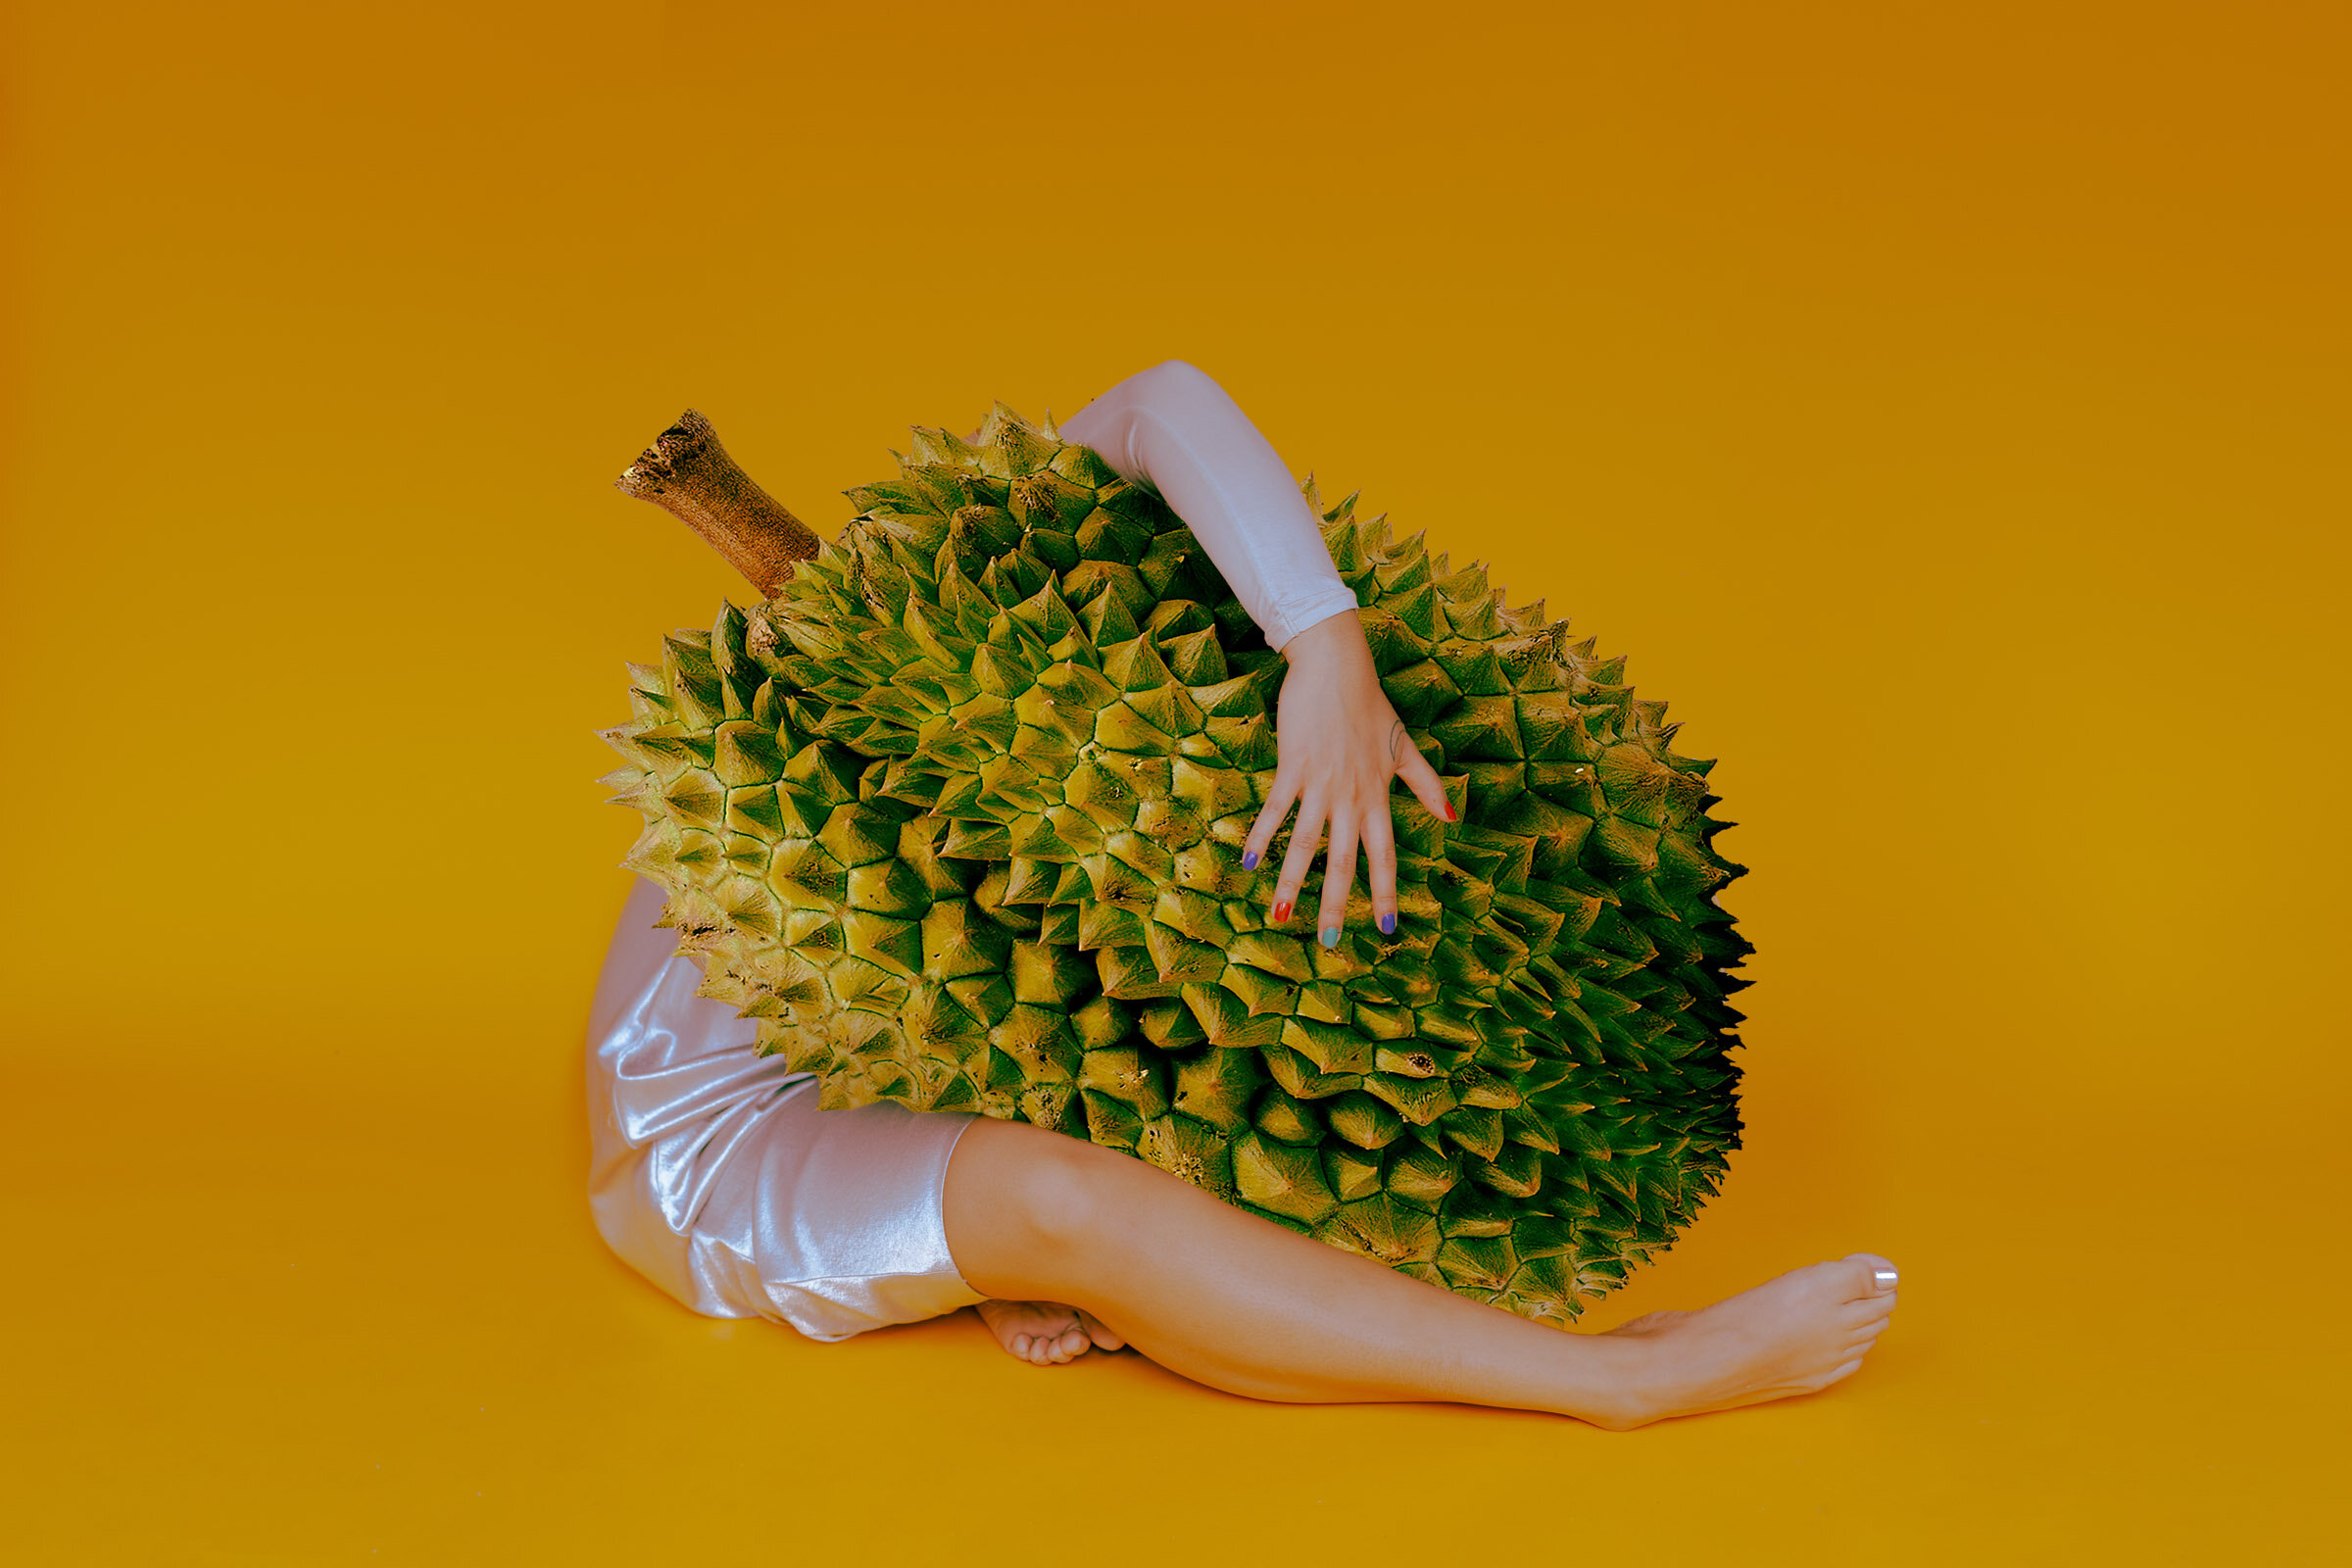  Ode to Durian is a self-portrait photo series that connects my family narrative to that of the controversial Durian fruit. The challenges that the Durian faces in America is not that different from the challenges that I face when I bring up my famil